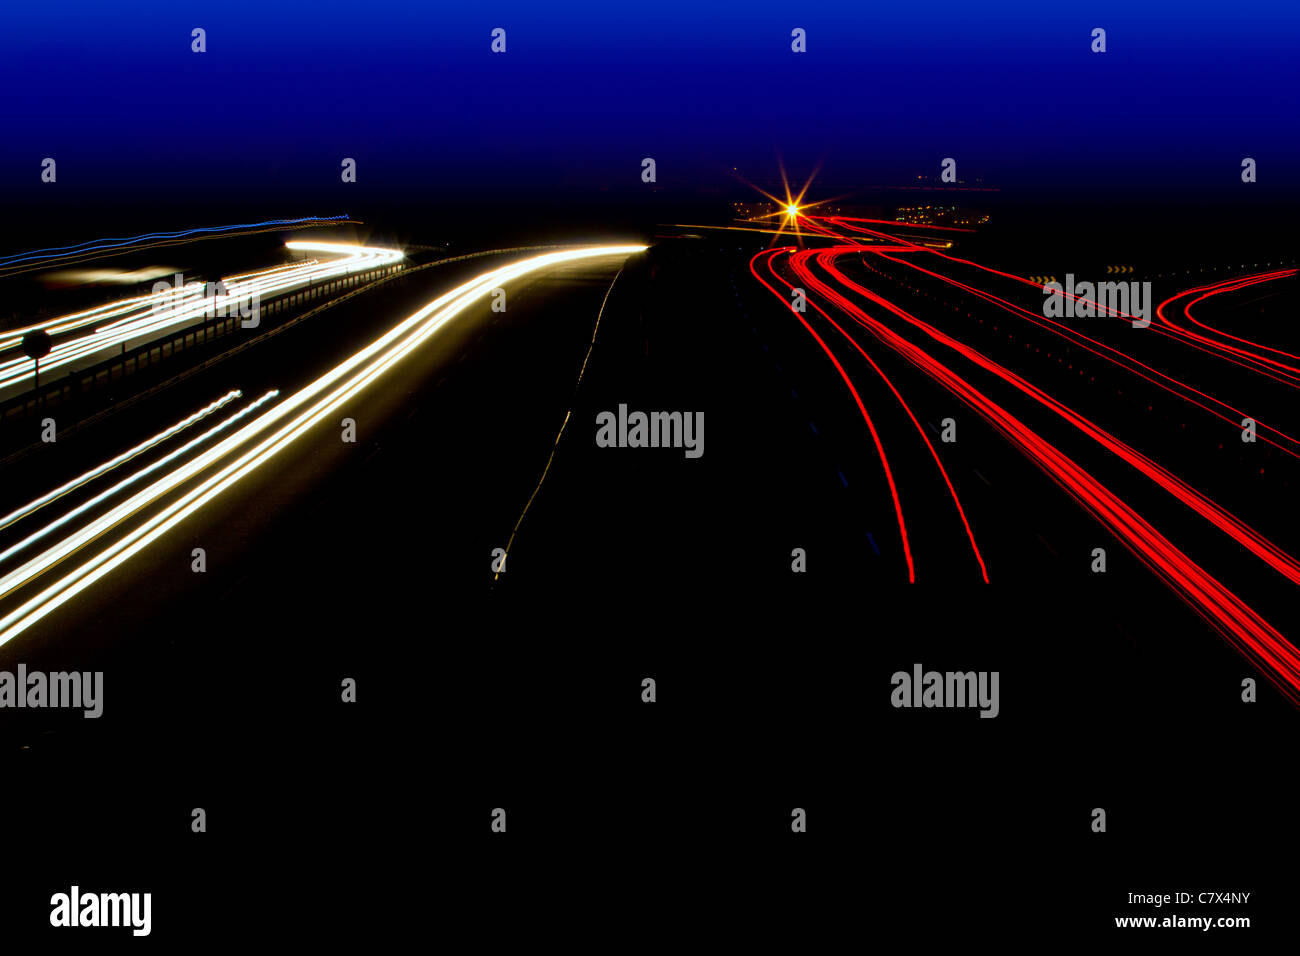 car light trails in red and white on night road curve Stock Photo